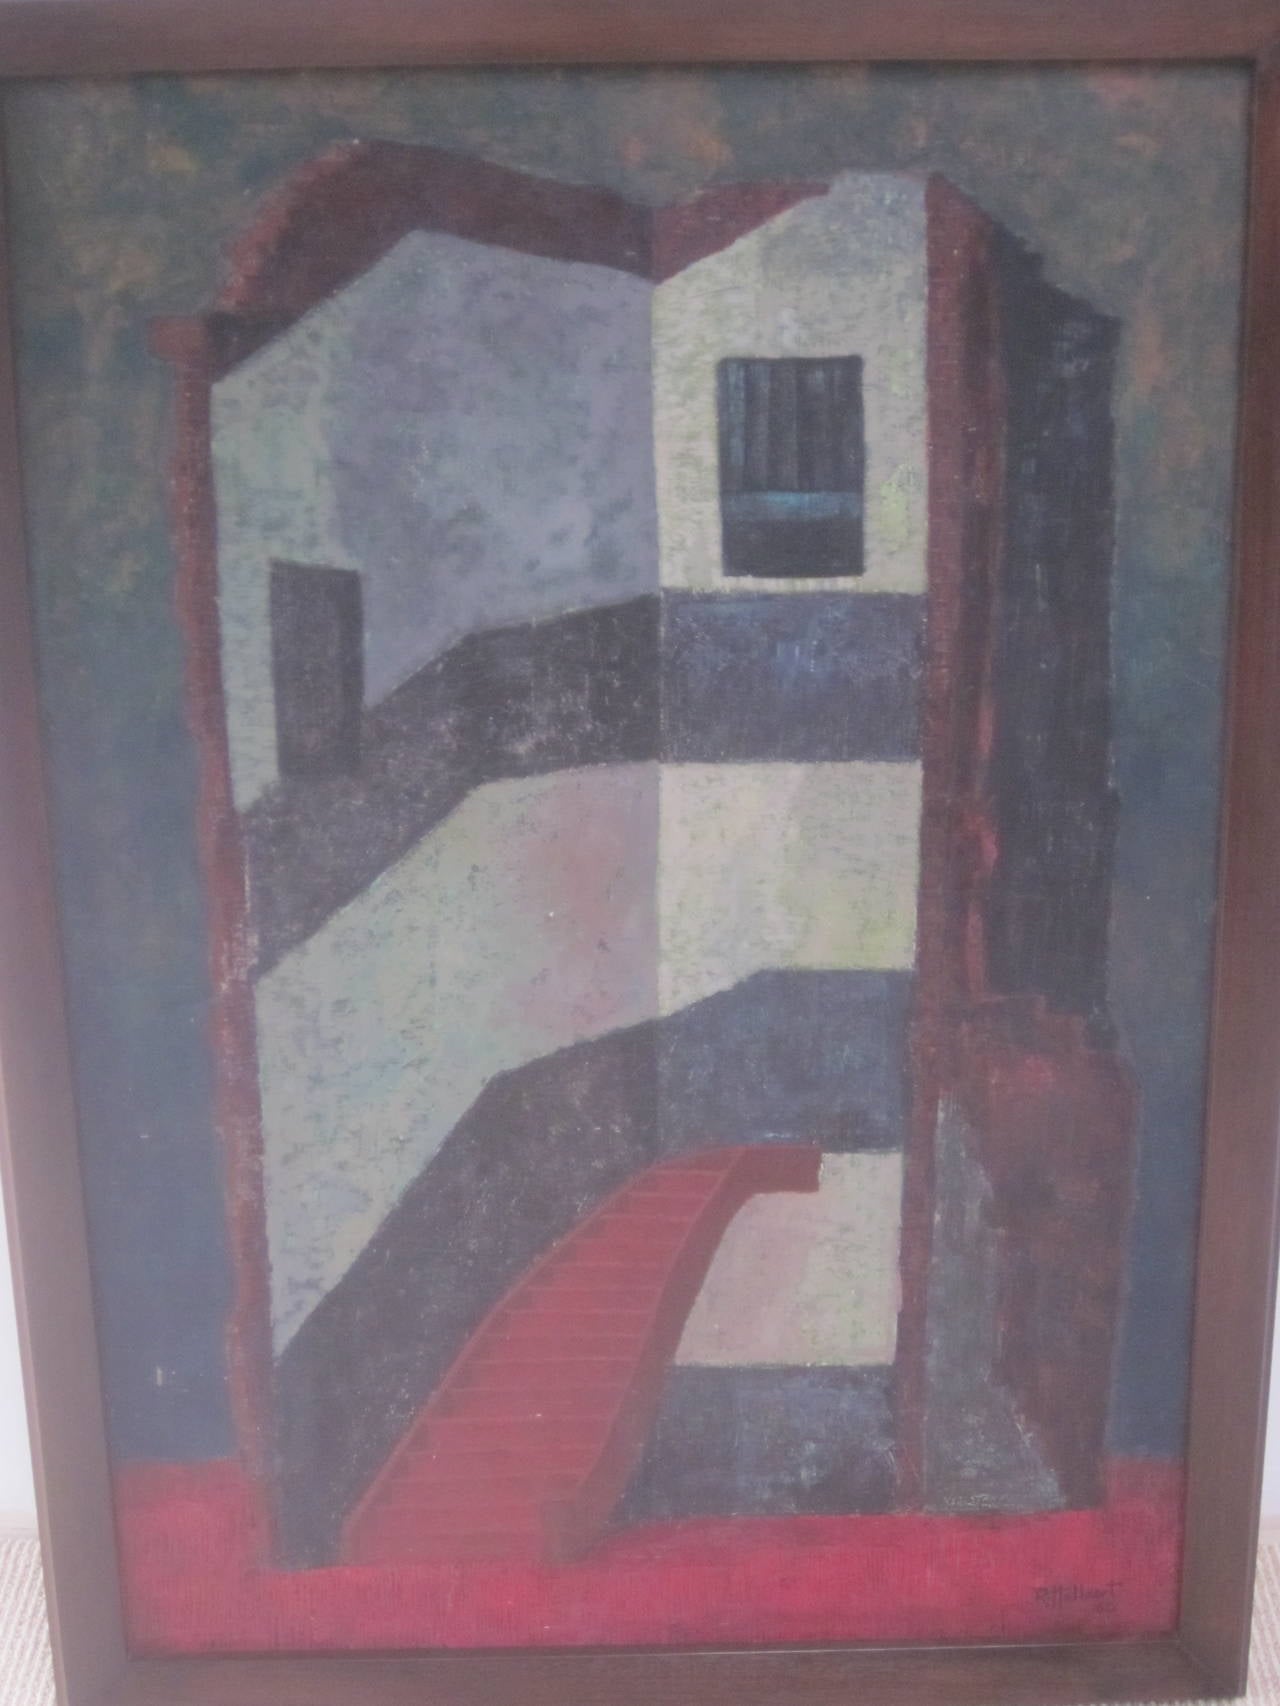 Painting in oil Signed R. Hullaert.

Painted from an architectural perspective with a stairway leading into, the painting references a surrealist / metaphysical theme of accessing the unconscious and the dream state.

References: Modern and